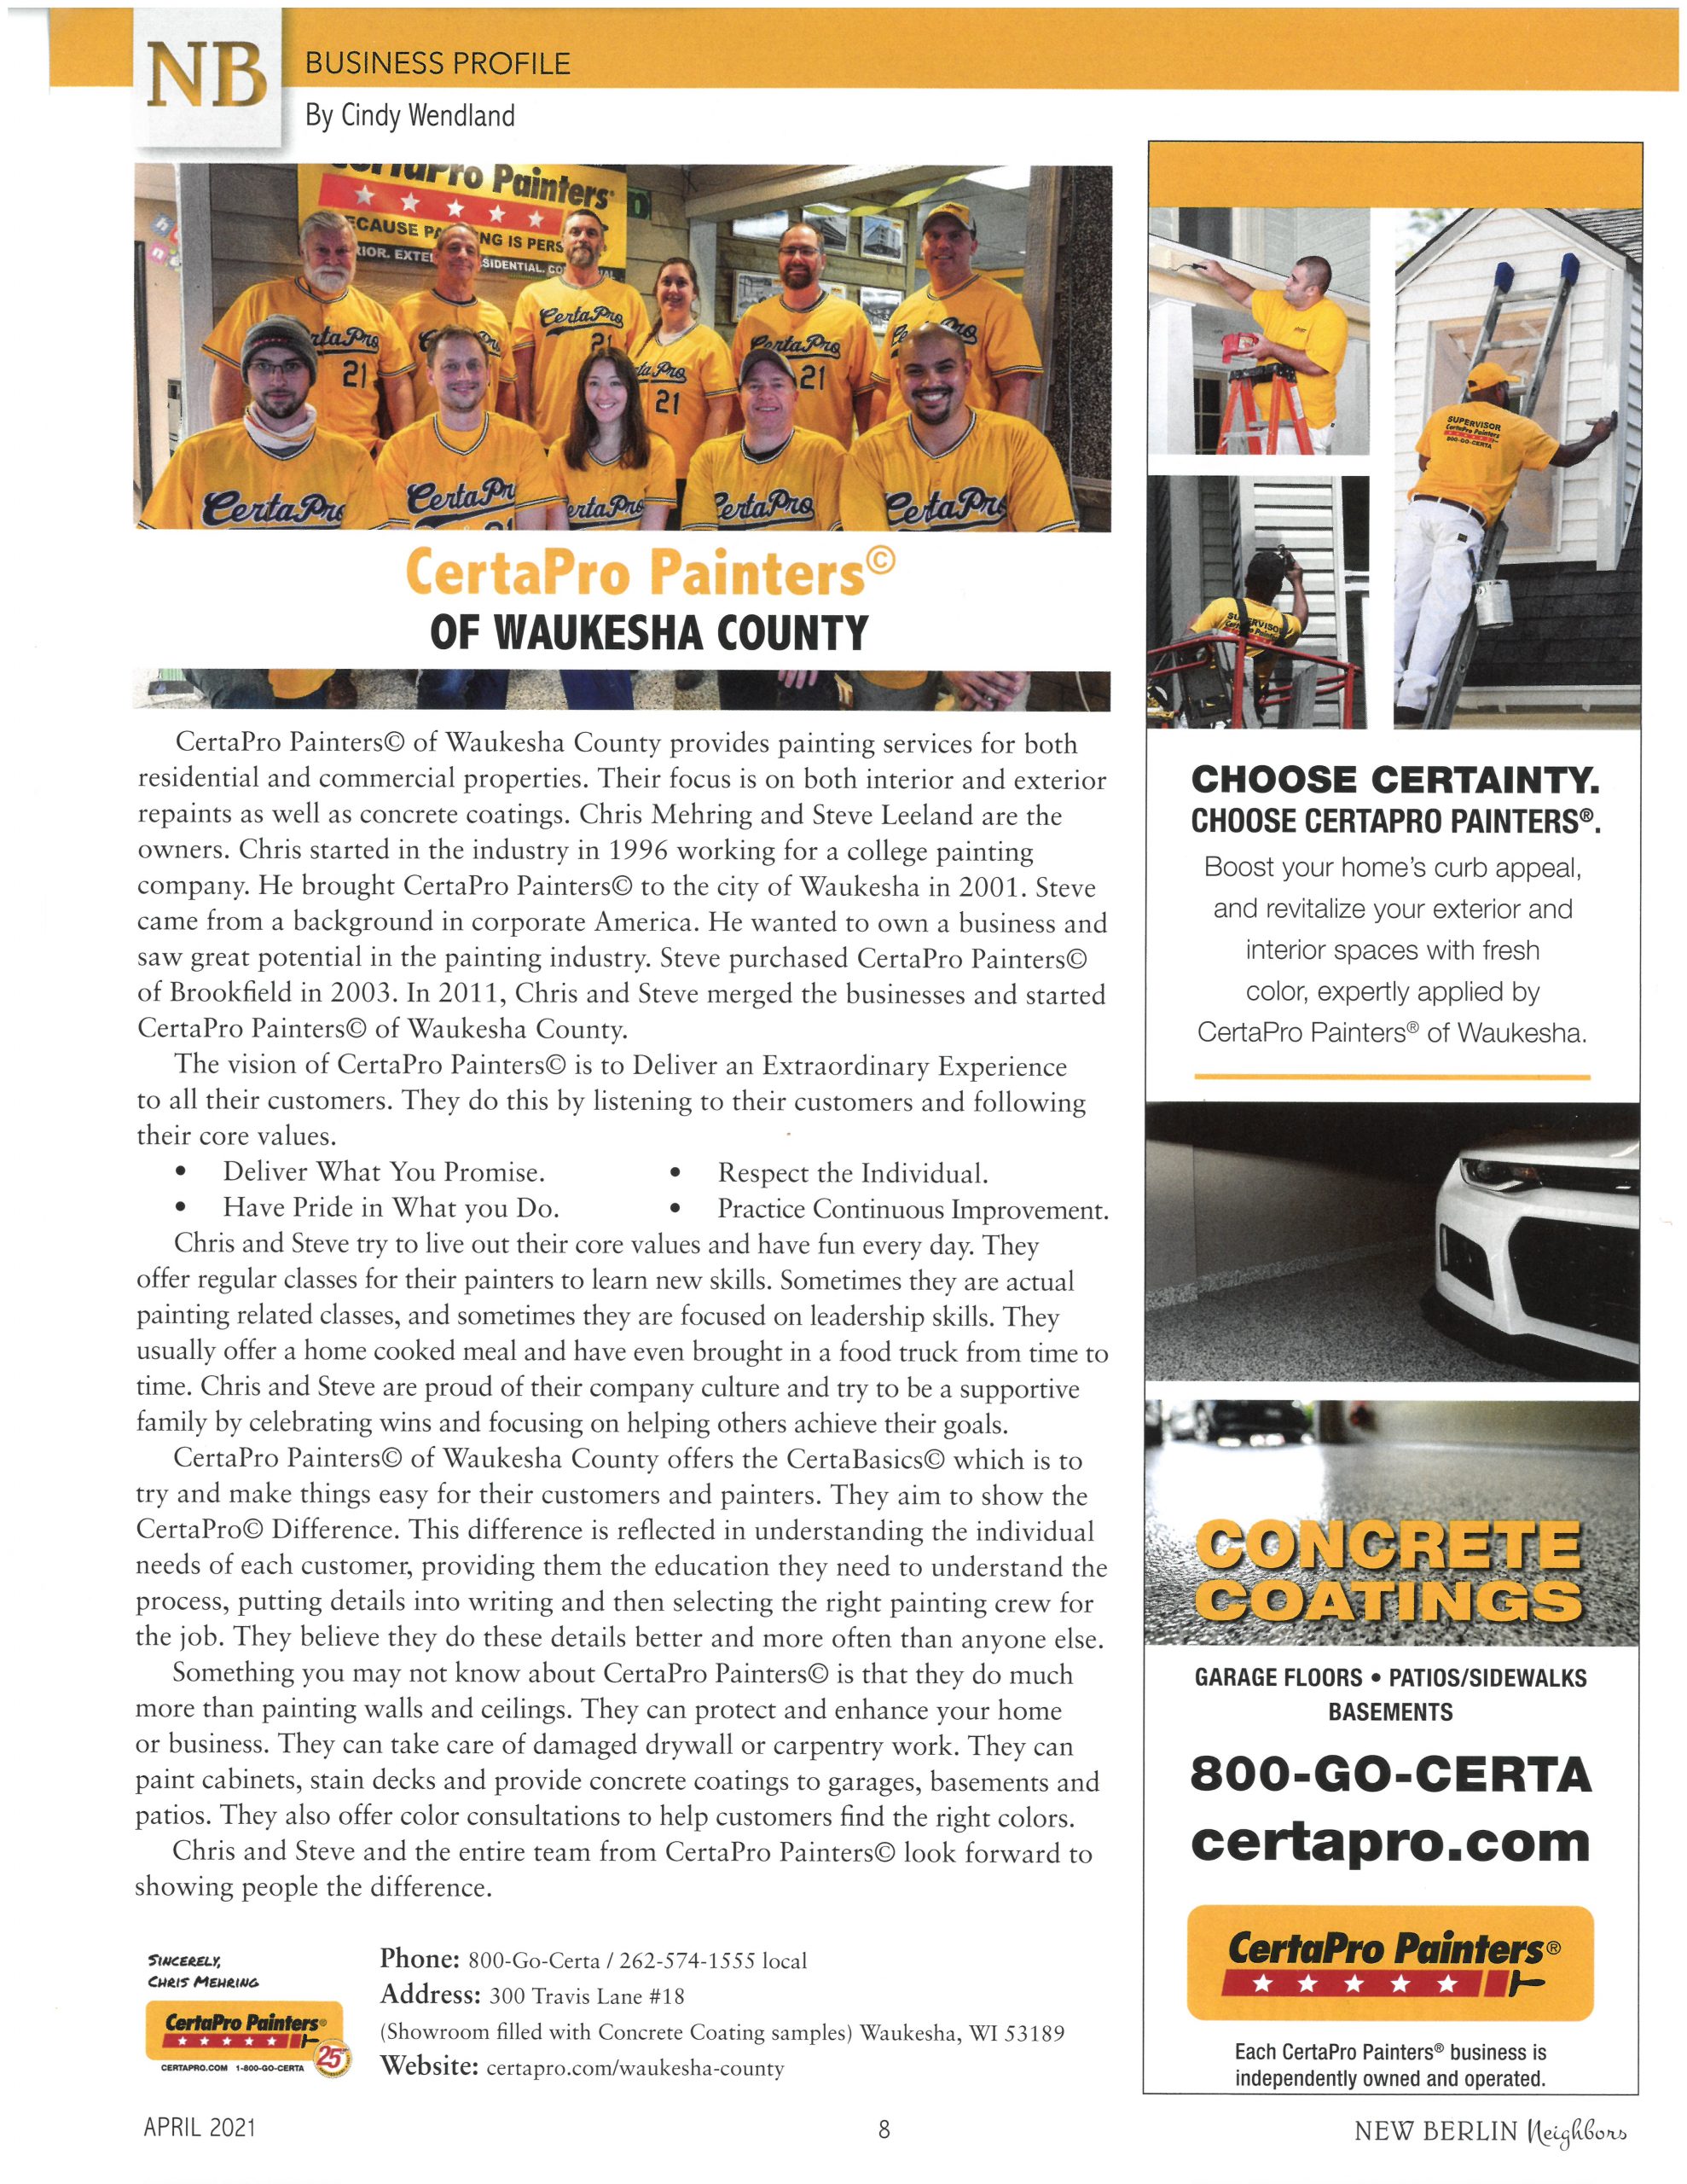 certapro painters waukesha cxounty featured page